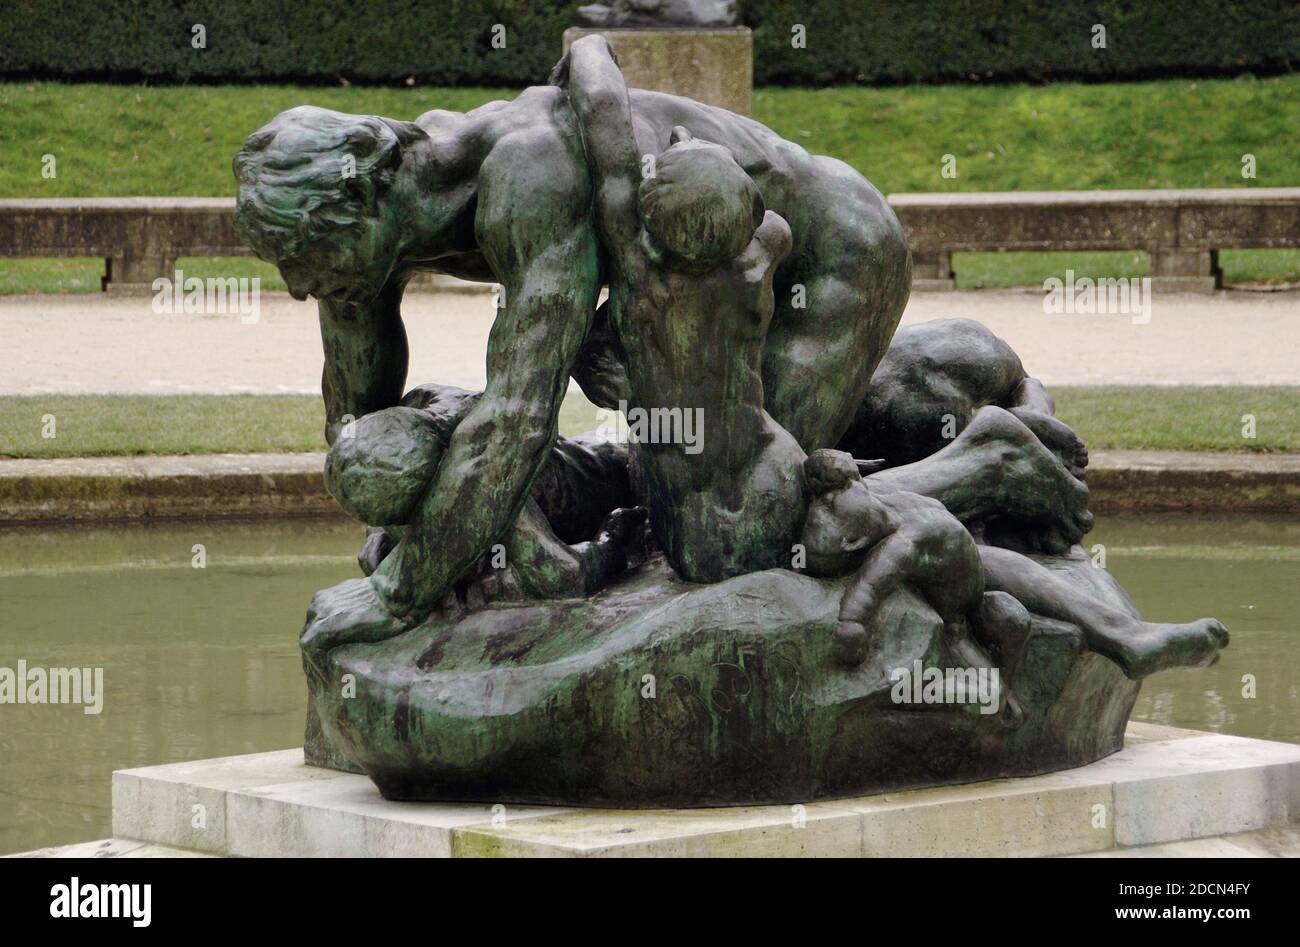 Auguste Rodin (1840-1917). French sculptor. Ugolino and his sons, 1901-1904. Bronze. Garden of Sculptures. Rodin Museum. Paris. France. Stock Photo